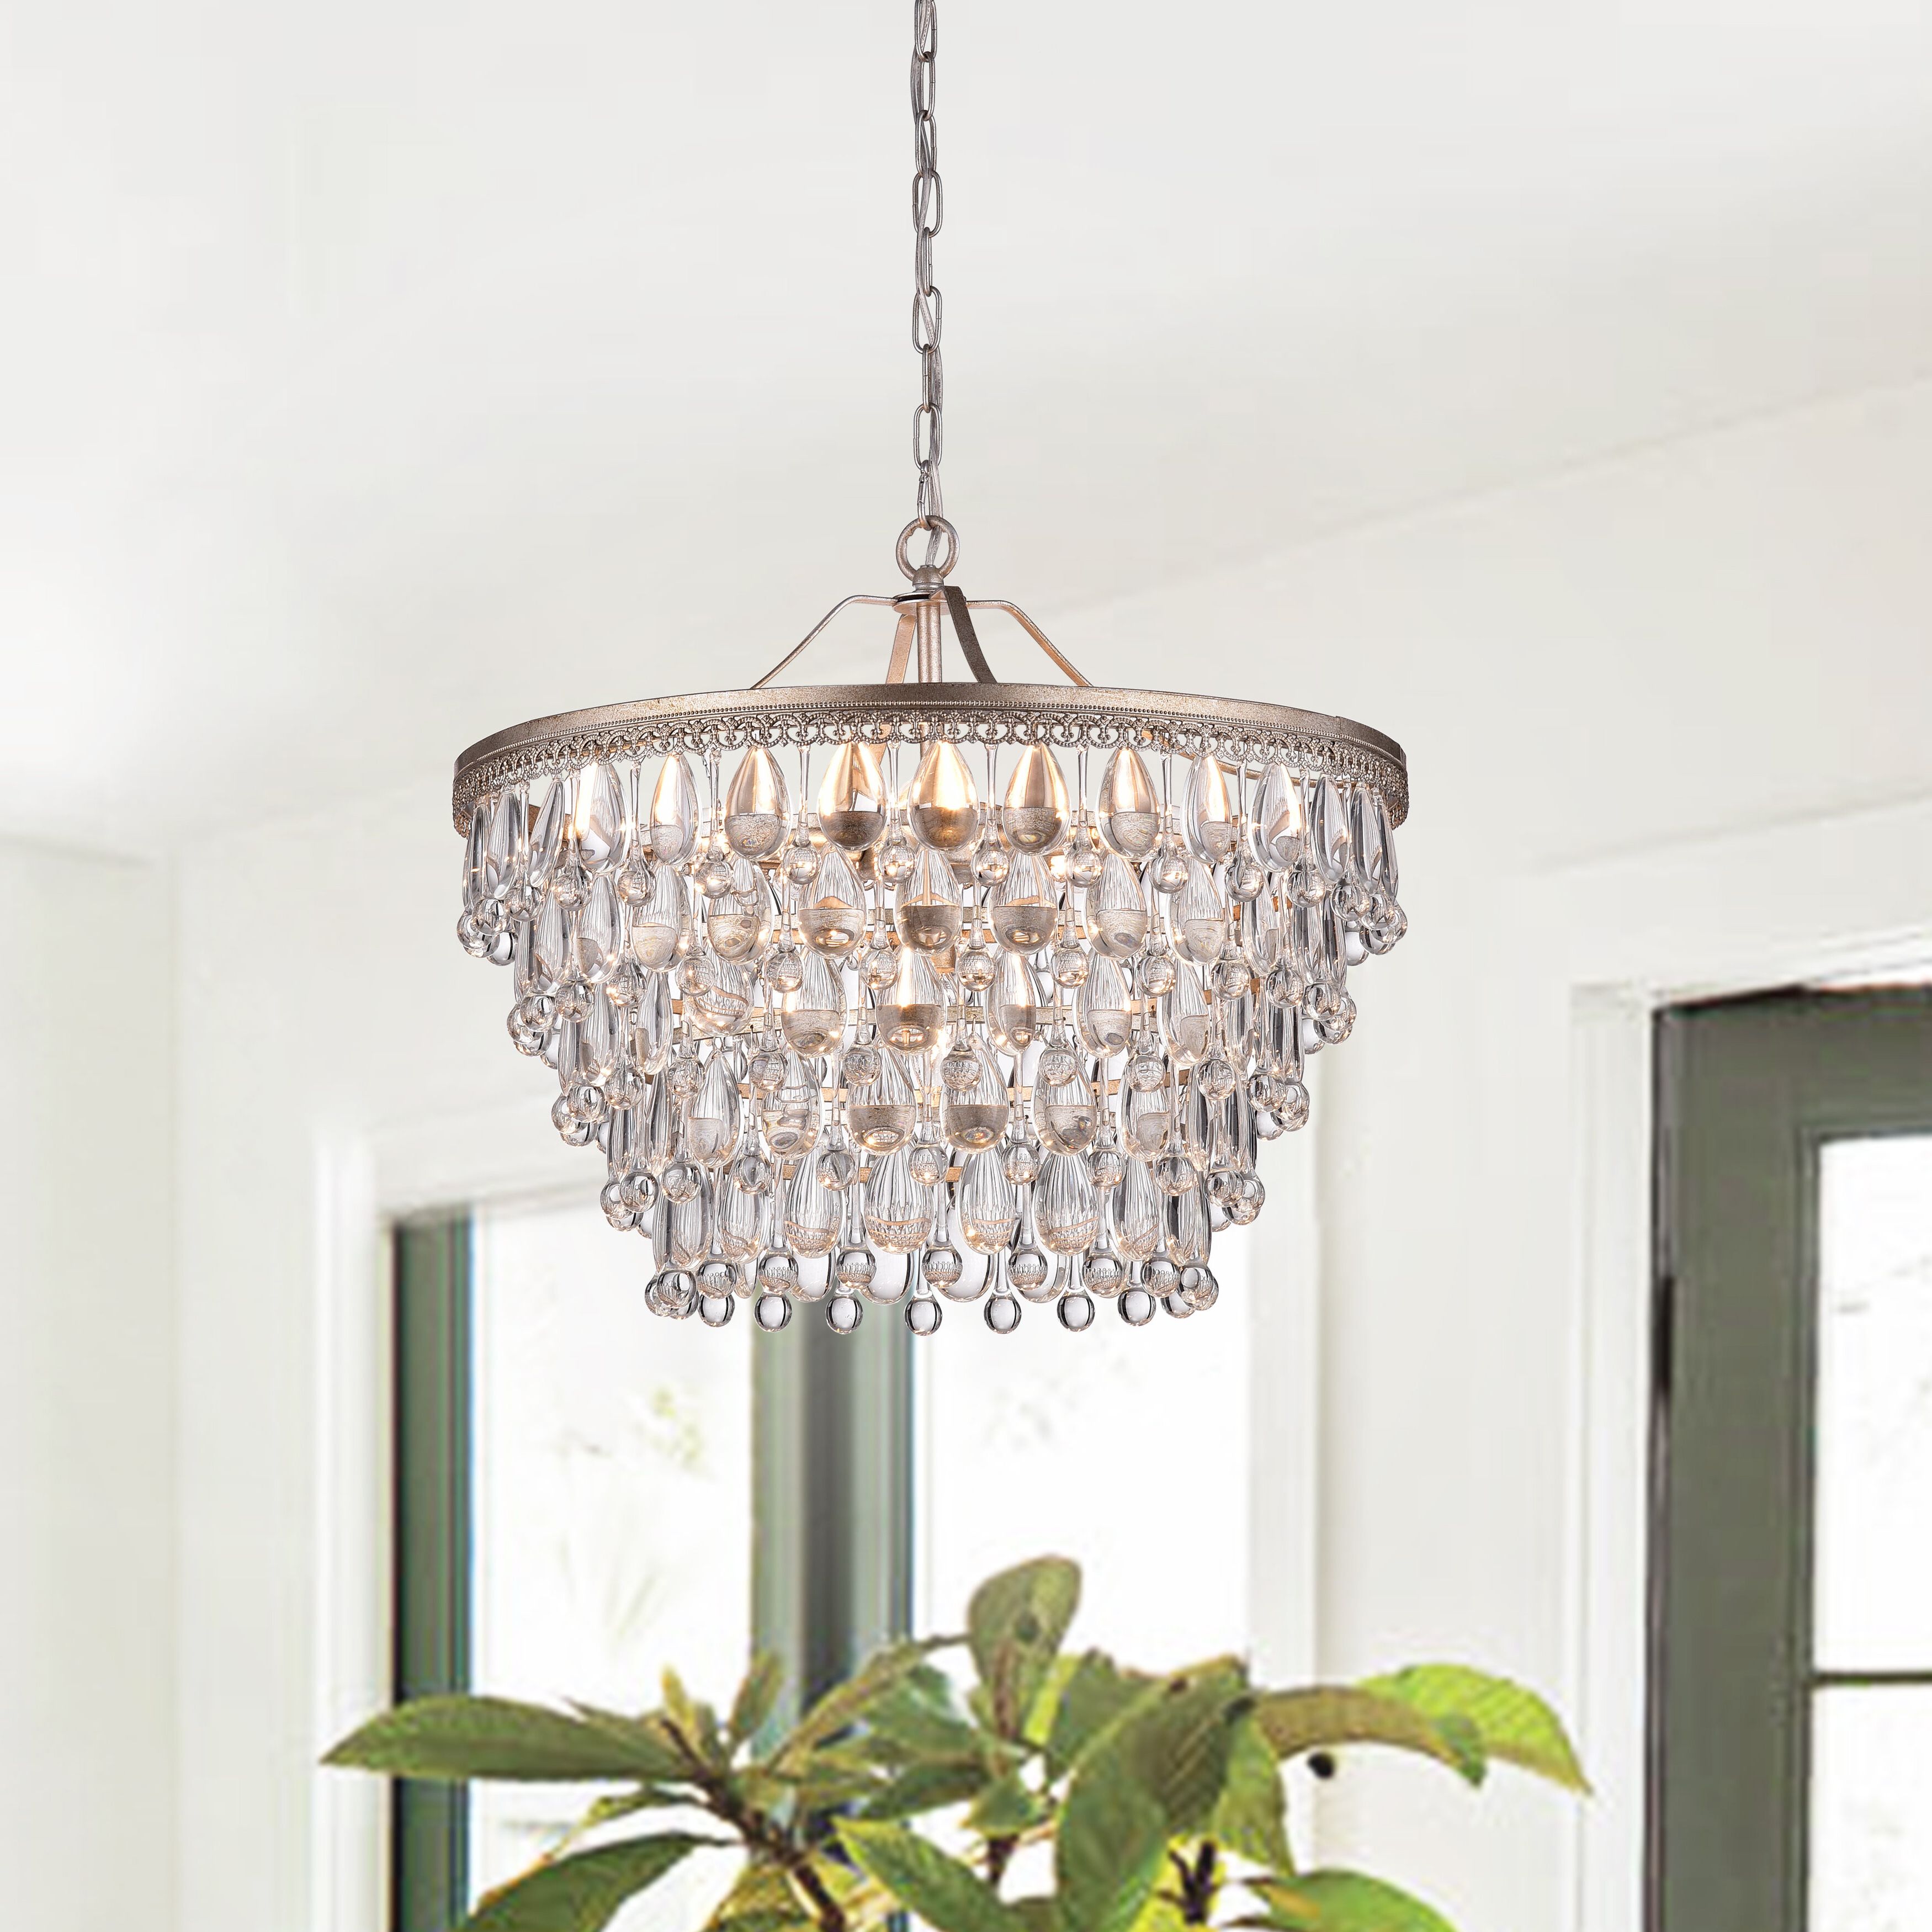 Well Known Rosdorf Park Bramers 6 Light Novelty Chandelier Throughout Bramers 6 Light Novelty Chandeliers (View 3 of 25)